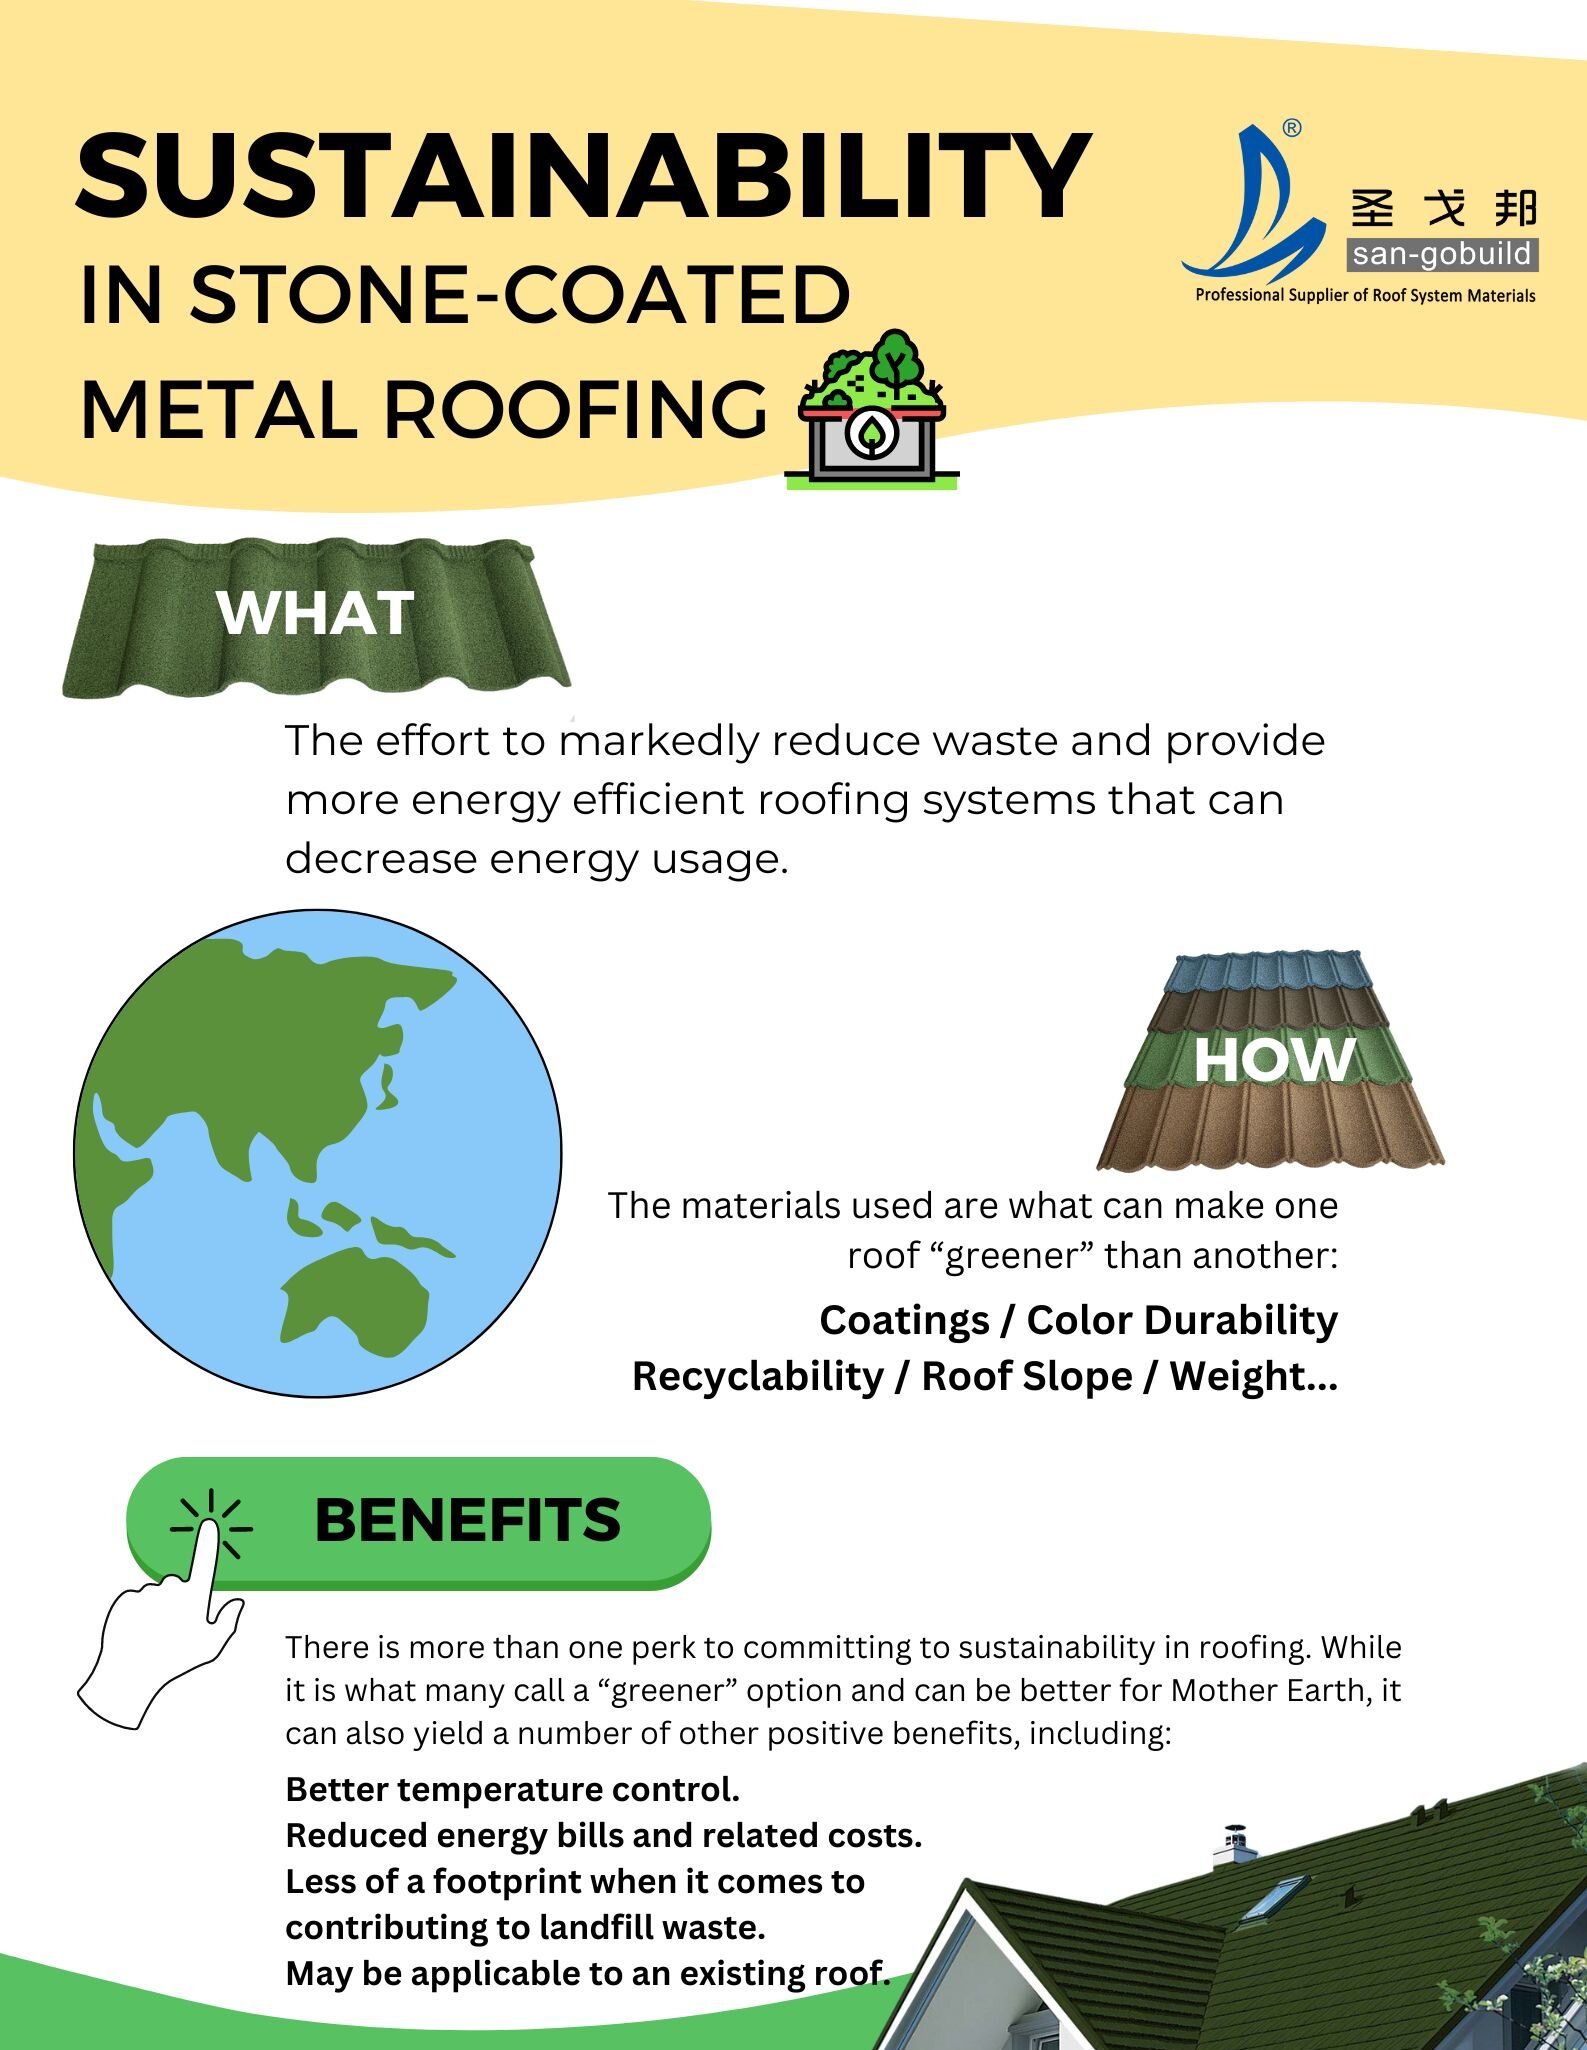 Sangobuild® Stone Coated Metal Roof Tiles Products Leading The Green Revolution In Roofing Materials Industry